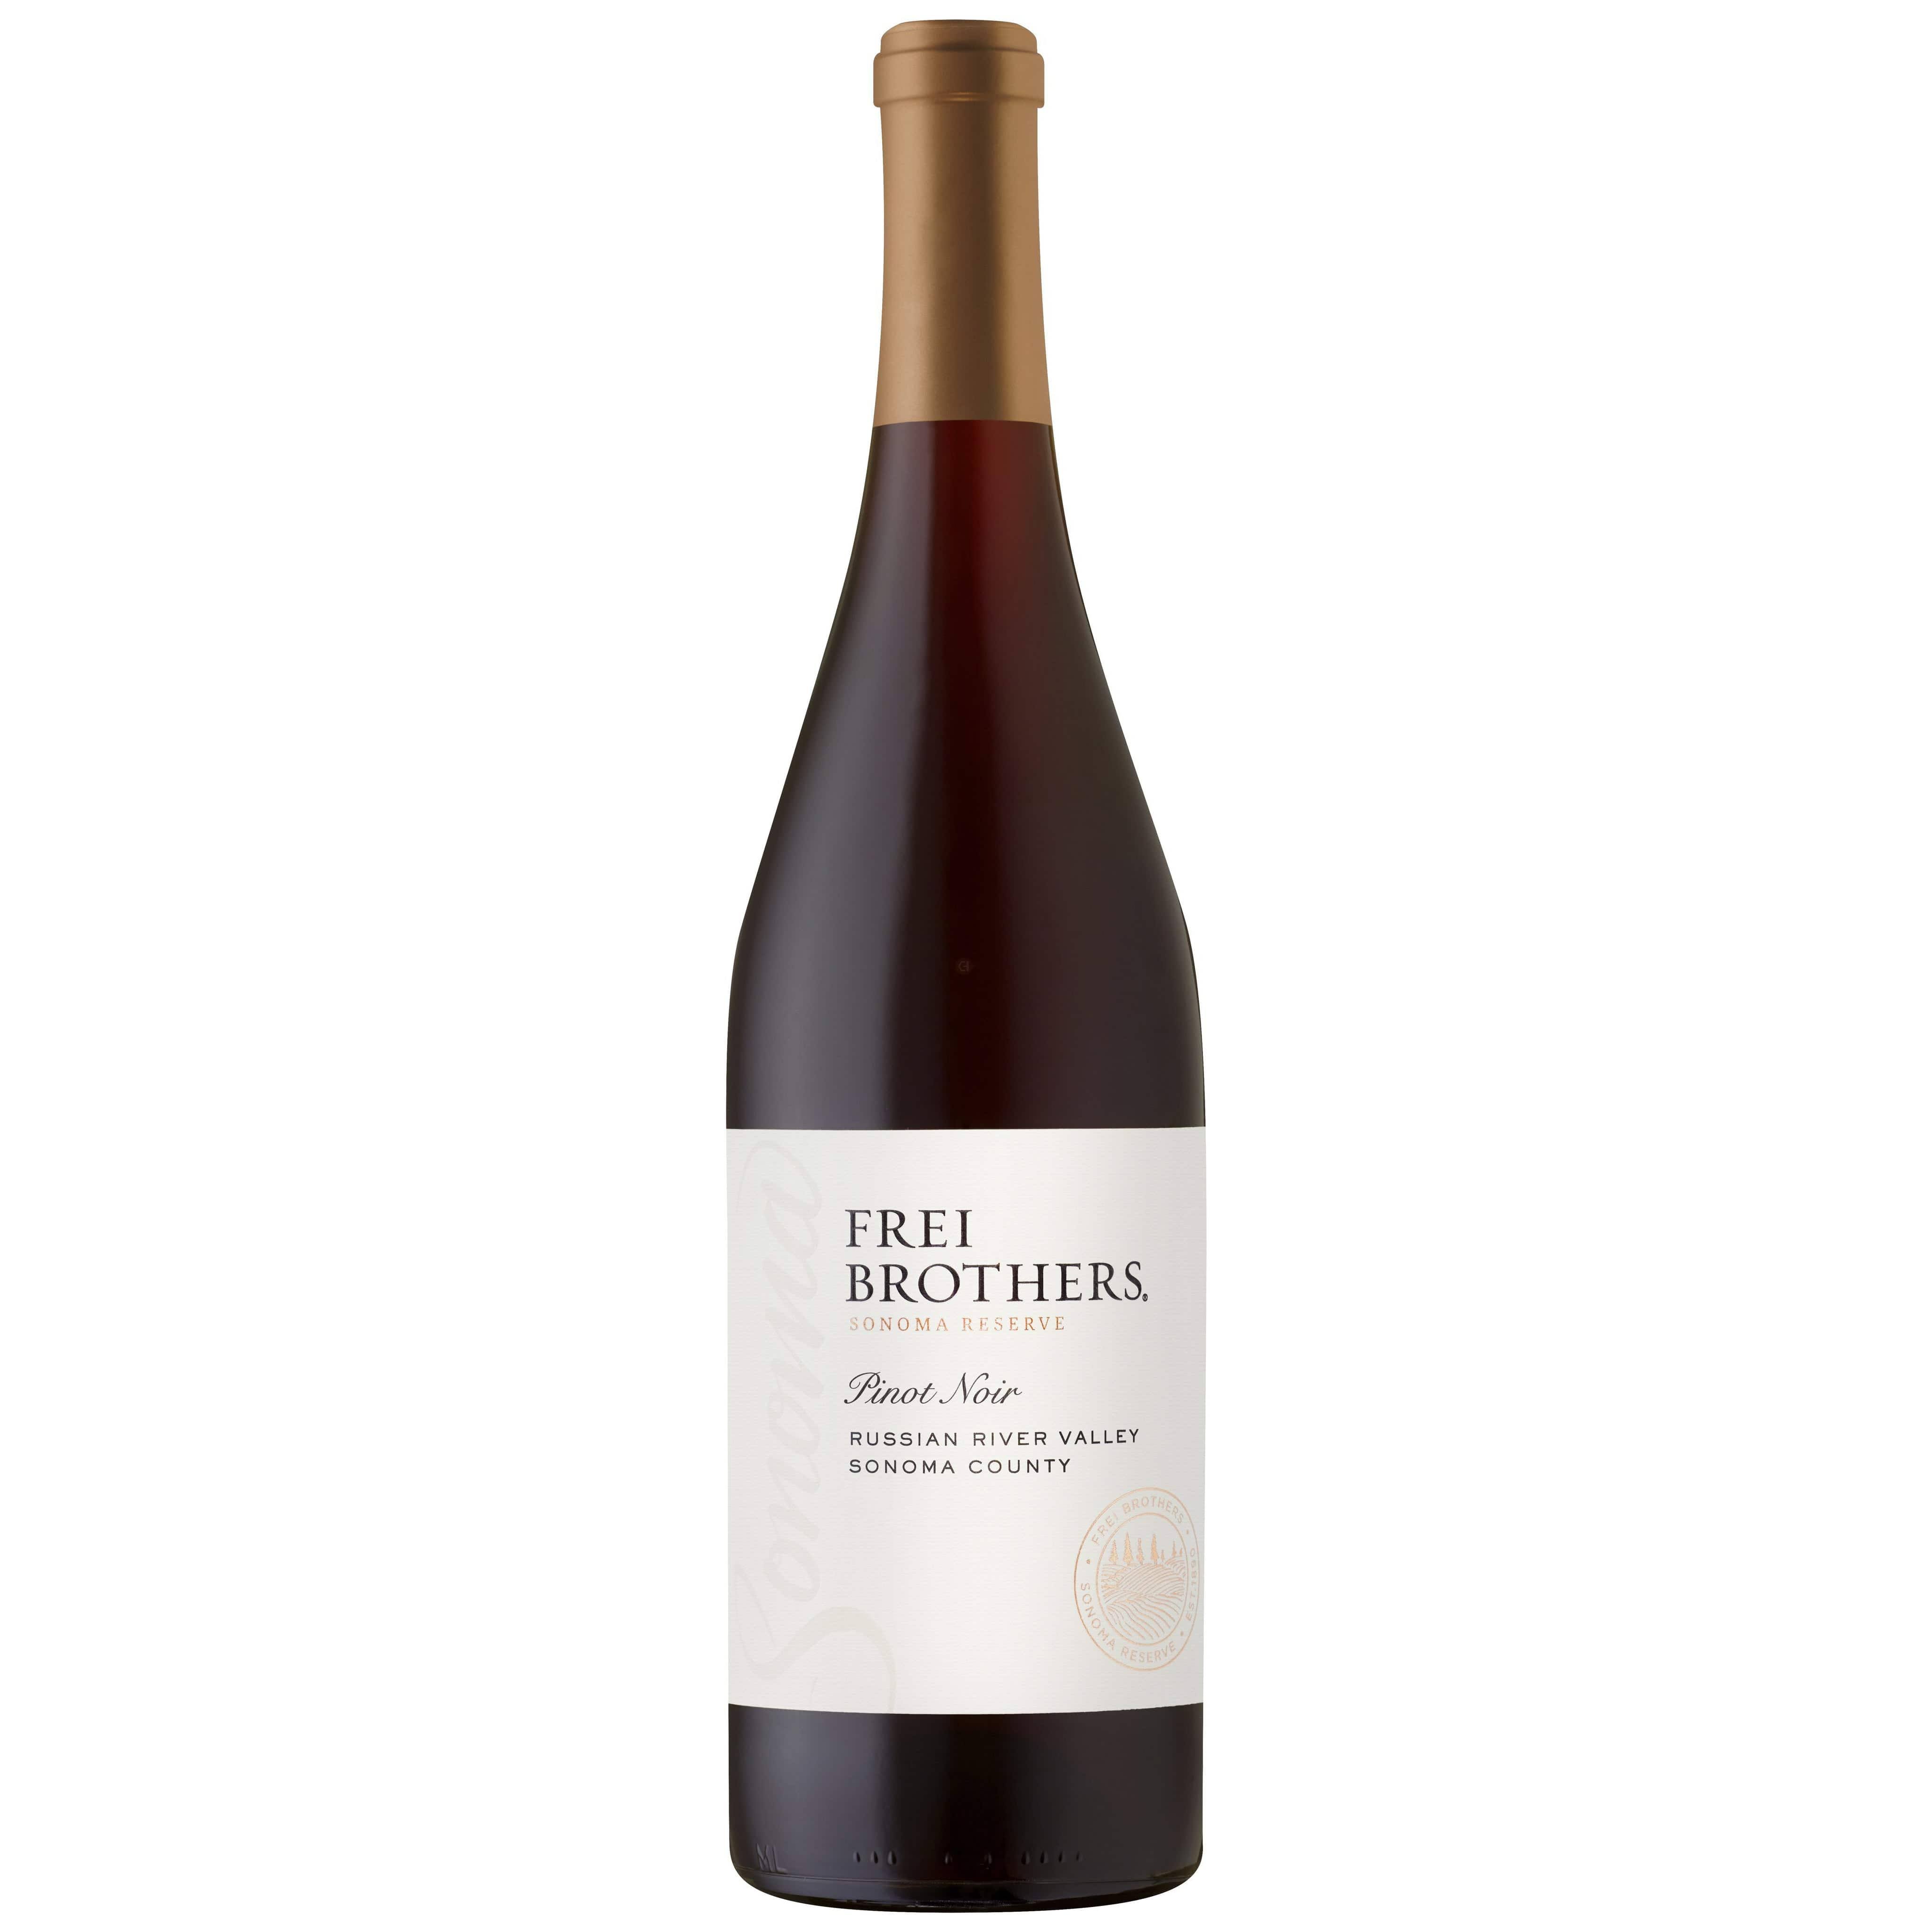 Frei Brothers Reserve Pinot Noir - Russian River Valley, Vintage, 2001, 750ml